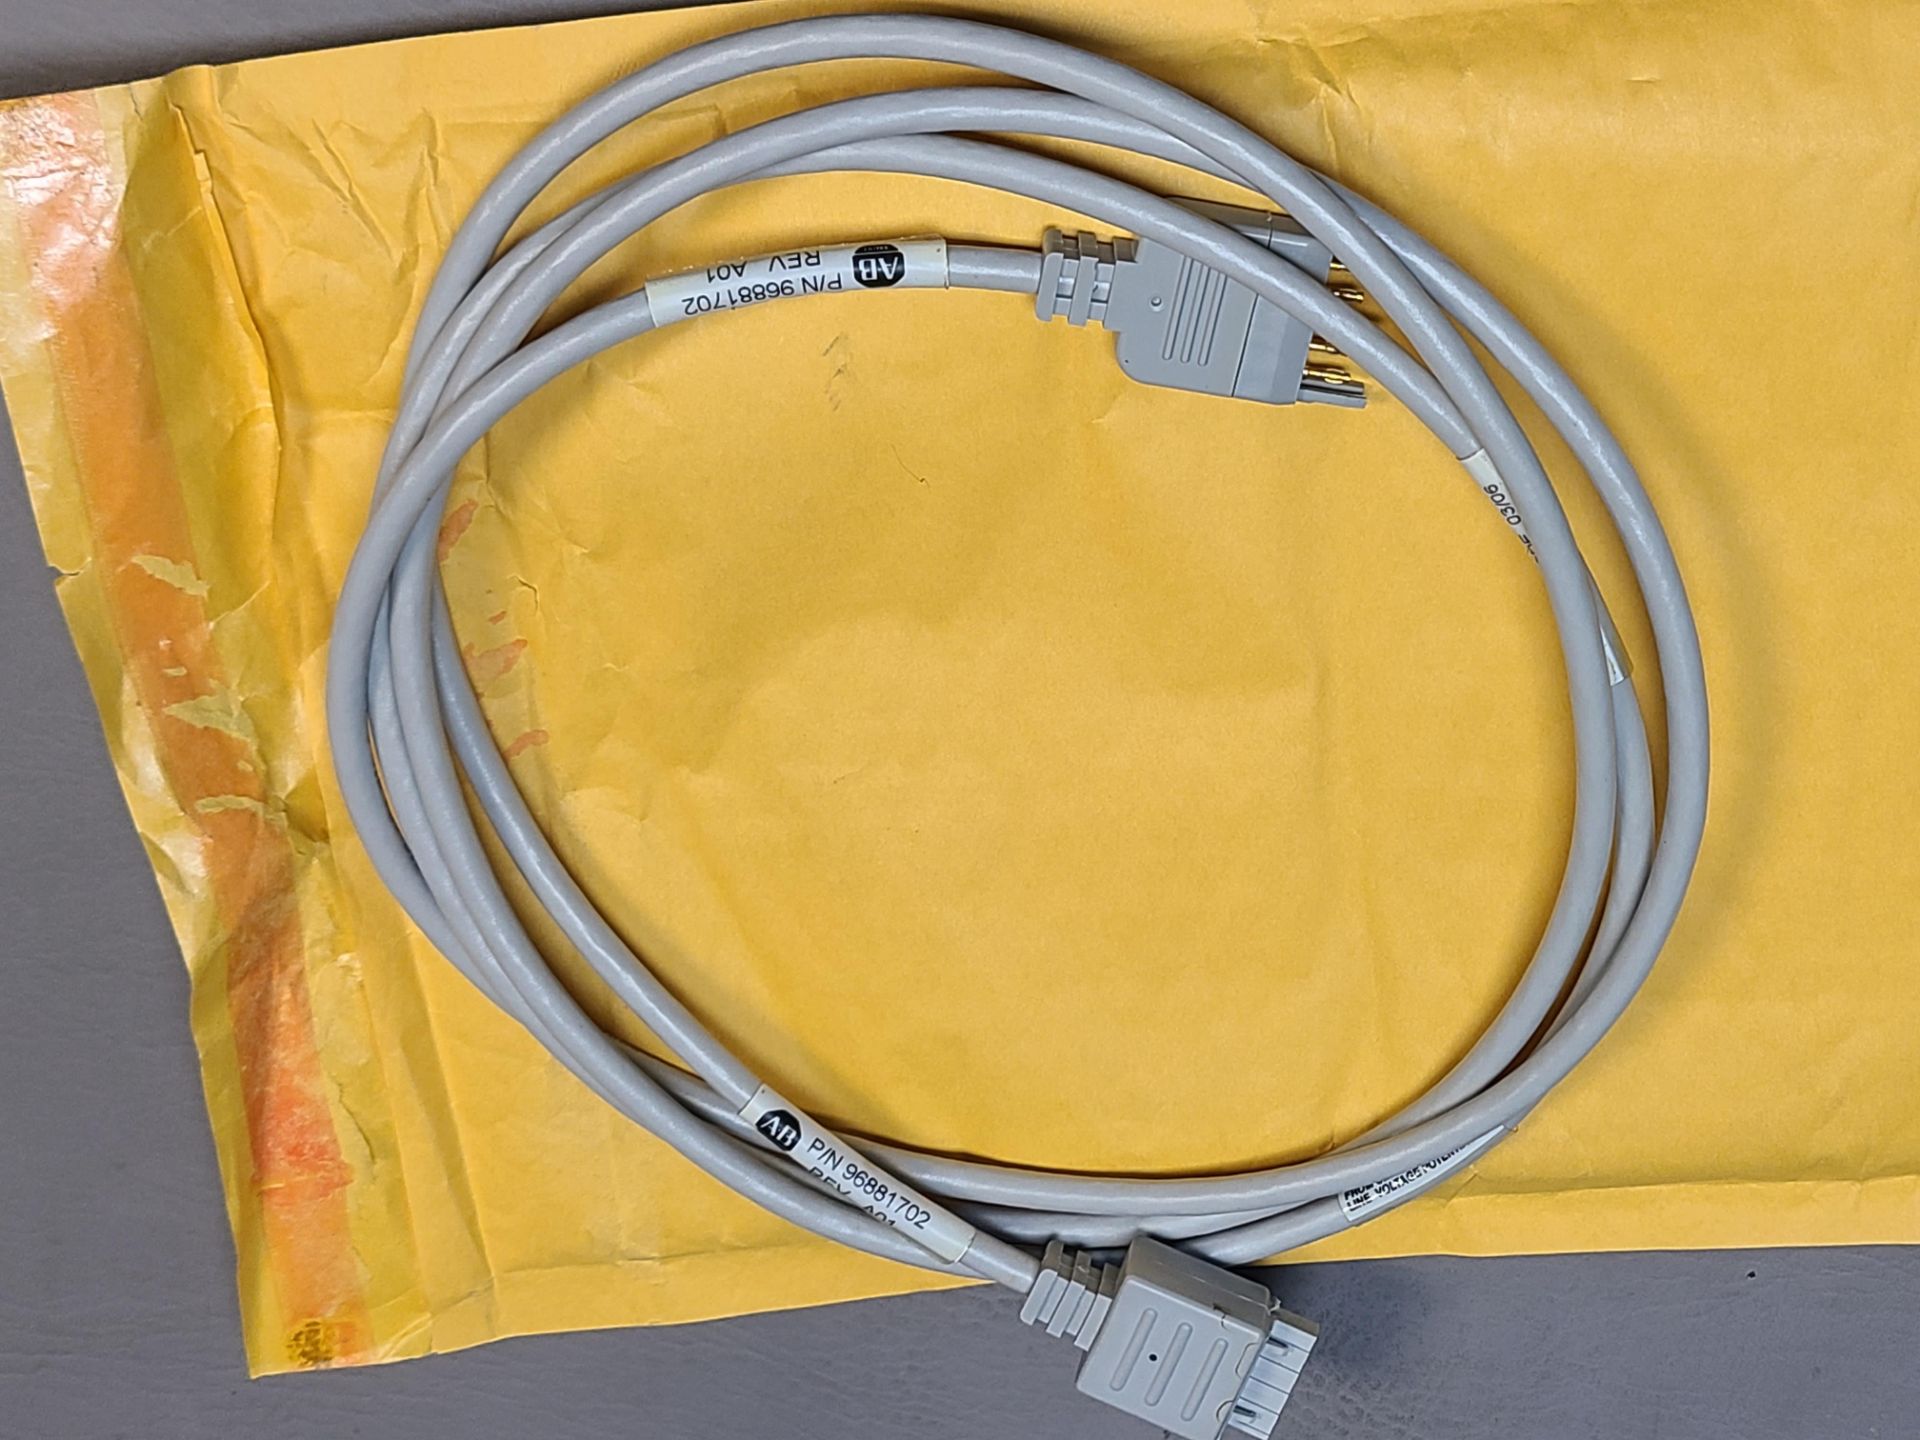 NEW ALLEN BRADLEY DEVICENET INTERFACE CABLE - Image 2 of 2